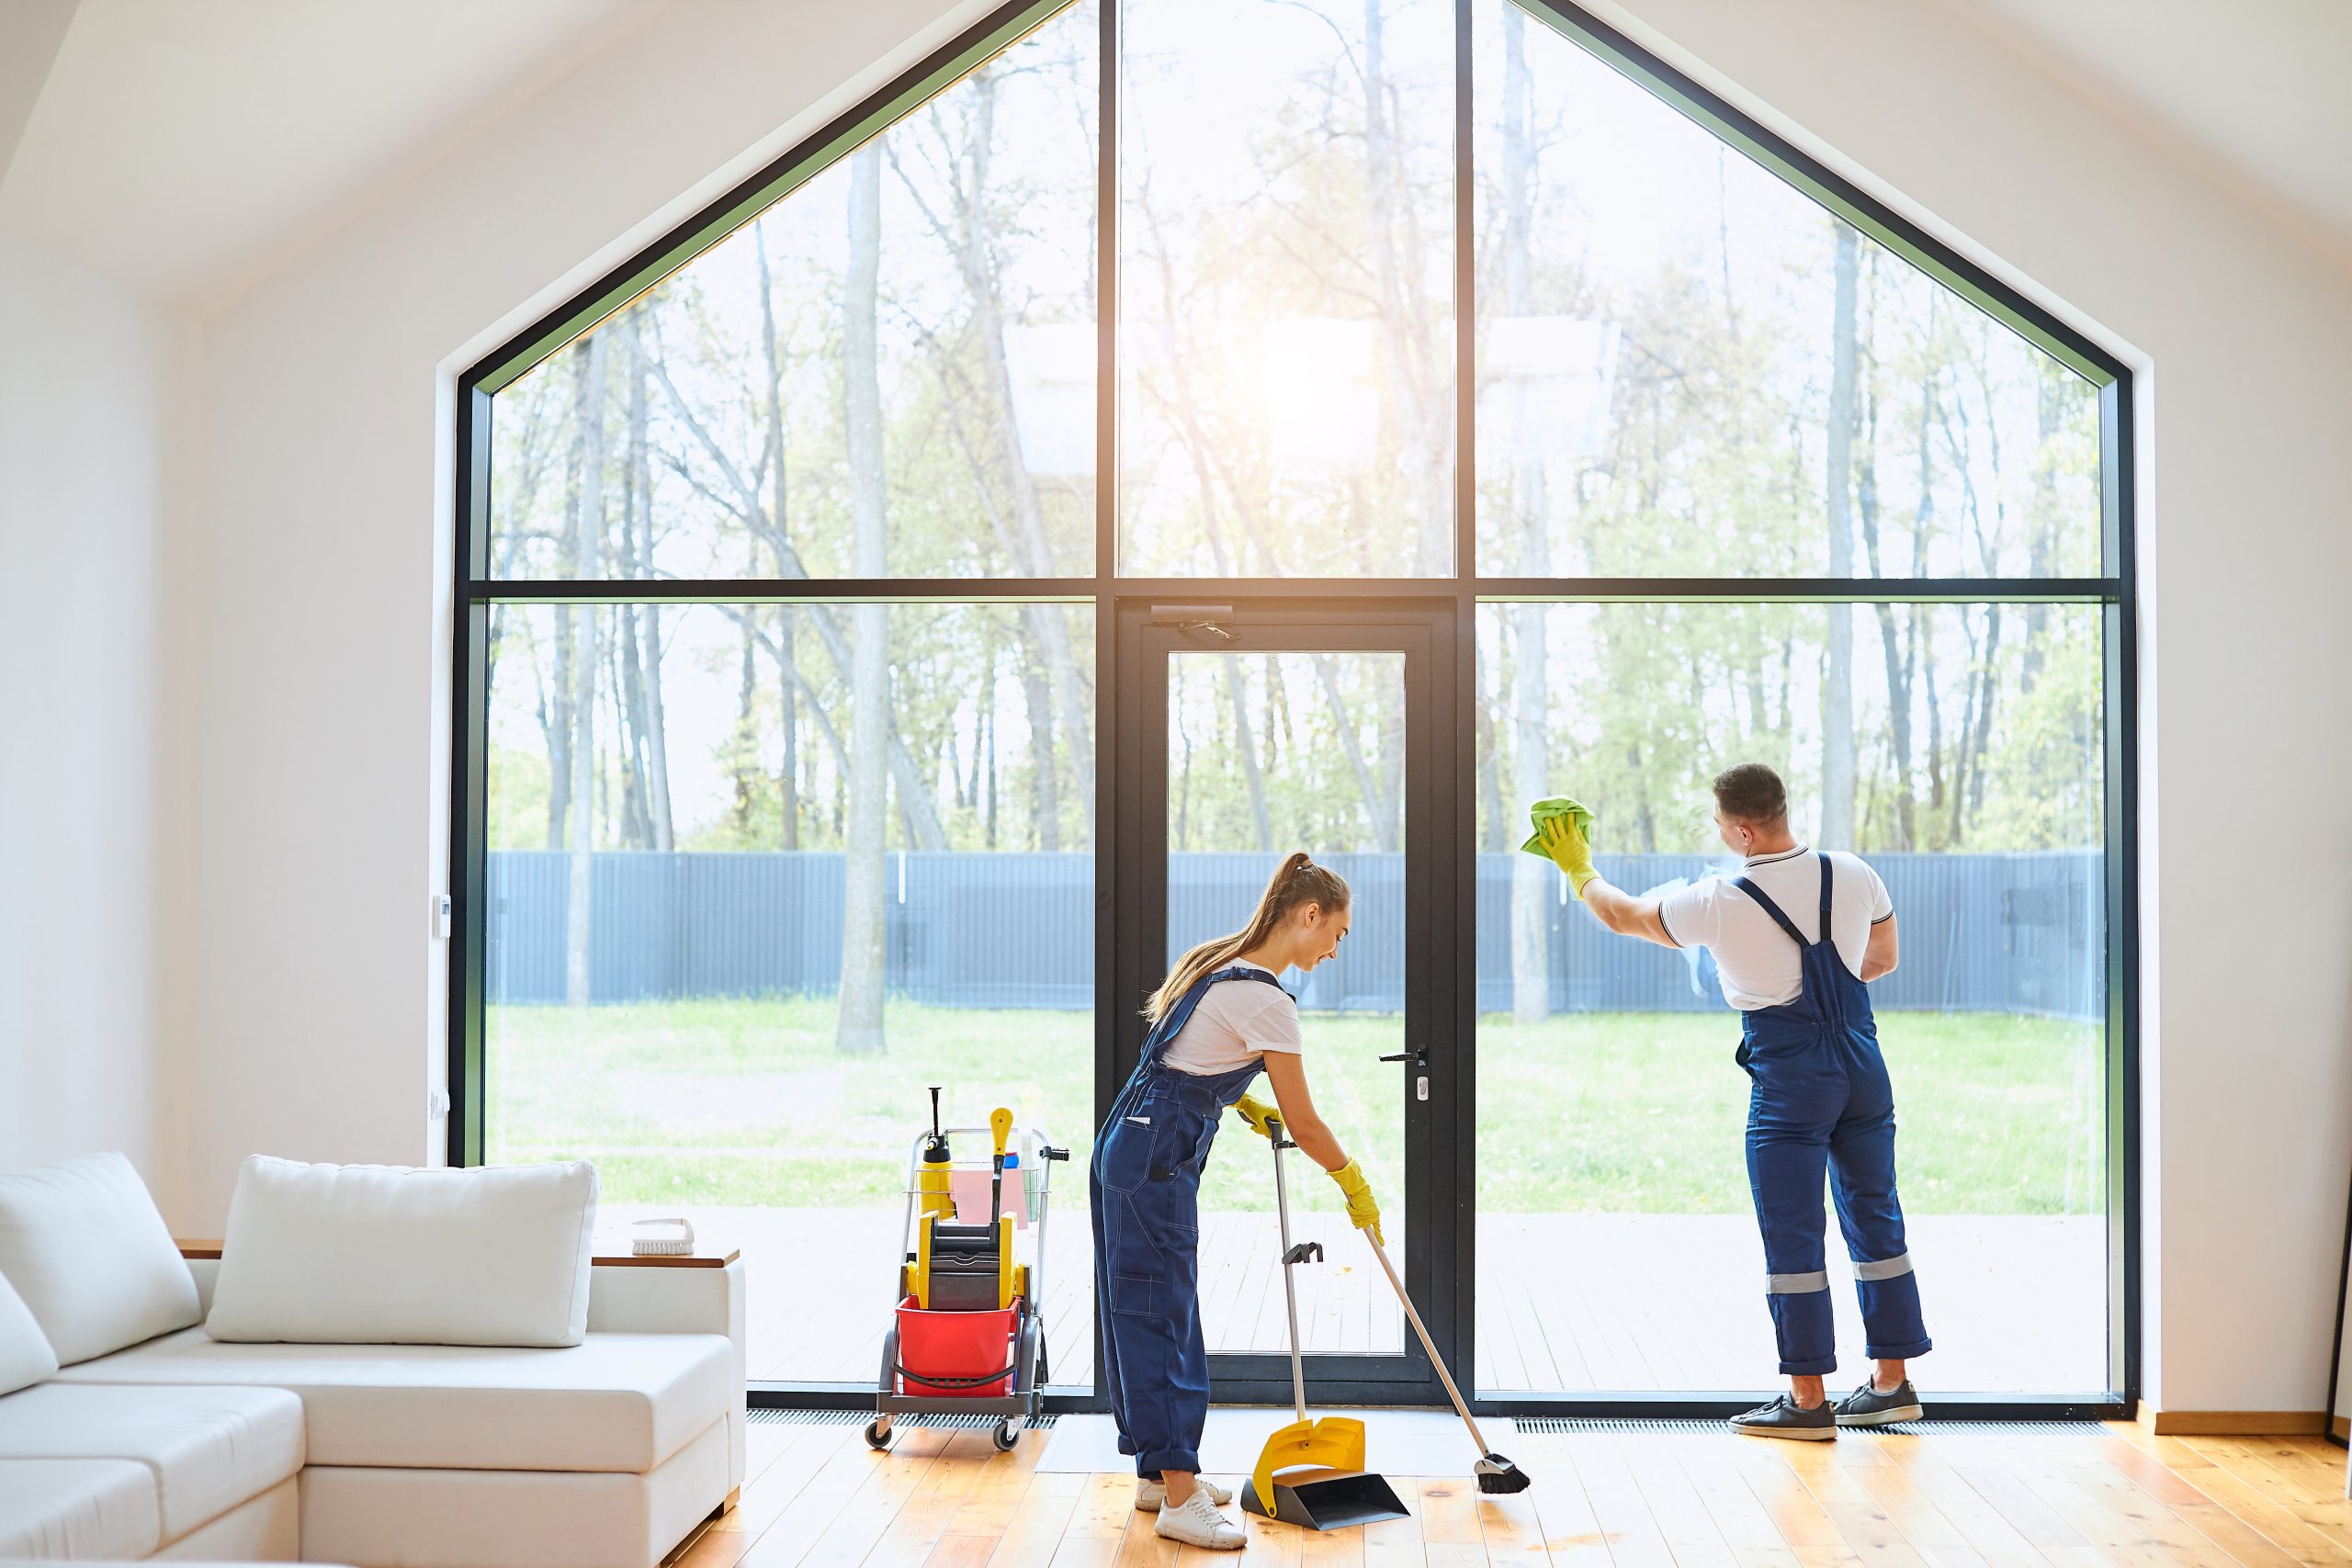 faq - What are house cleaning services?